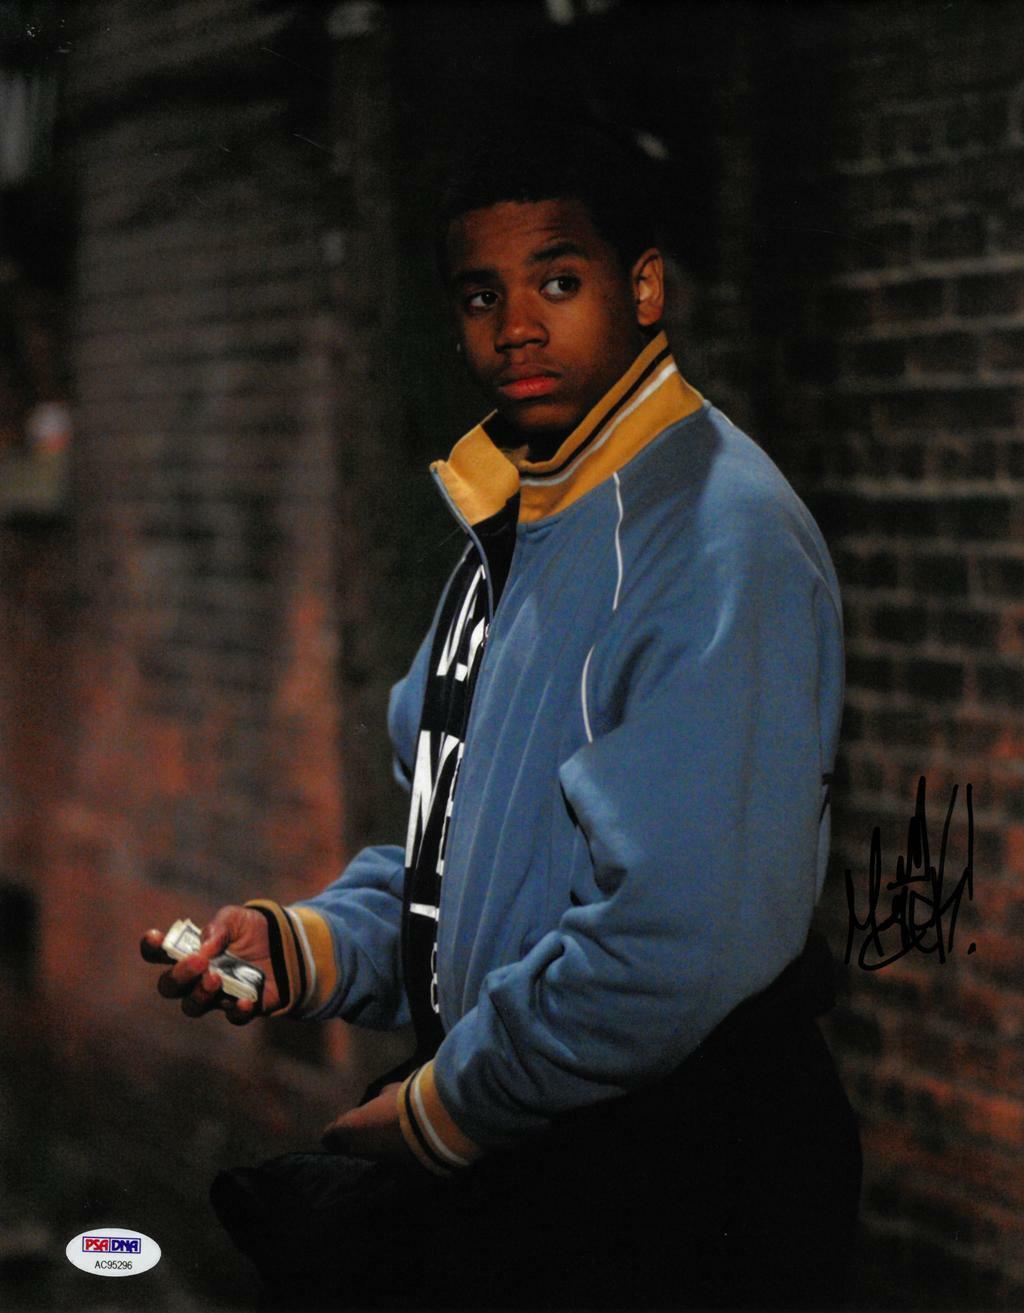 Tristan Wilds Signed The Wire Authentic Autographed 11x14 Photo Poster painting PSA/DNA #AC95296